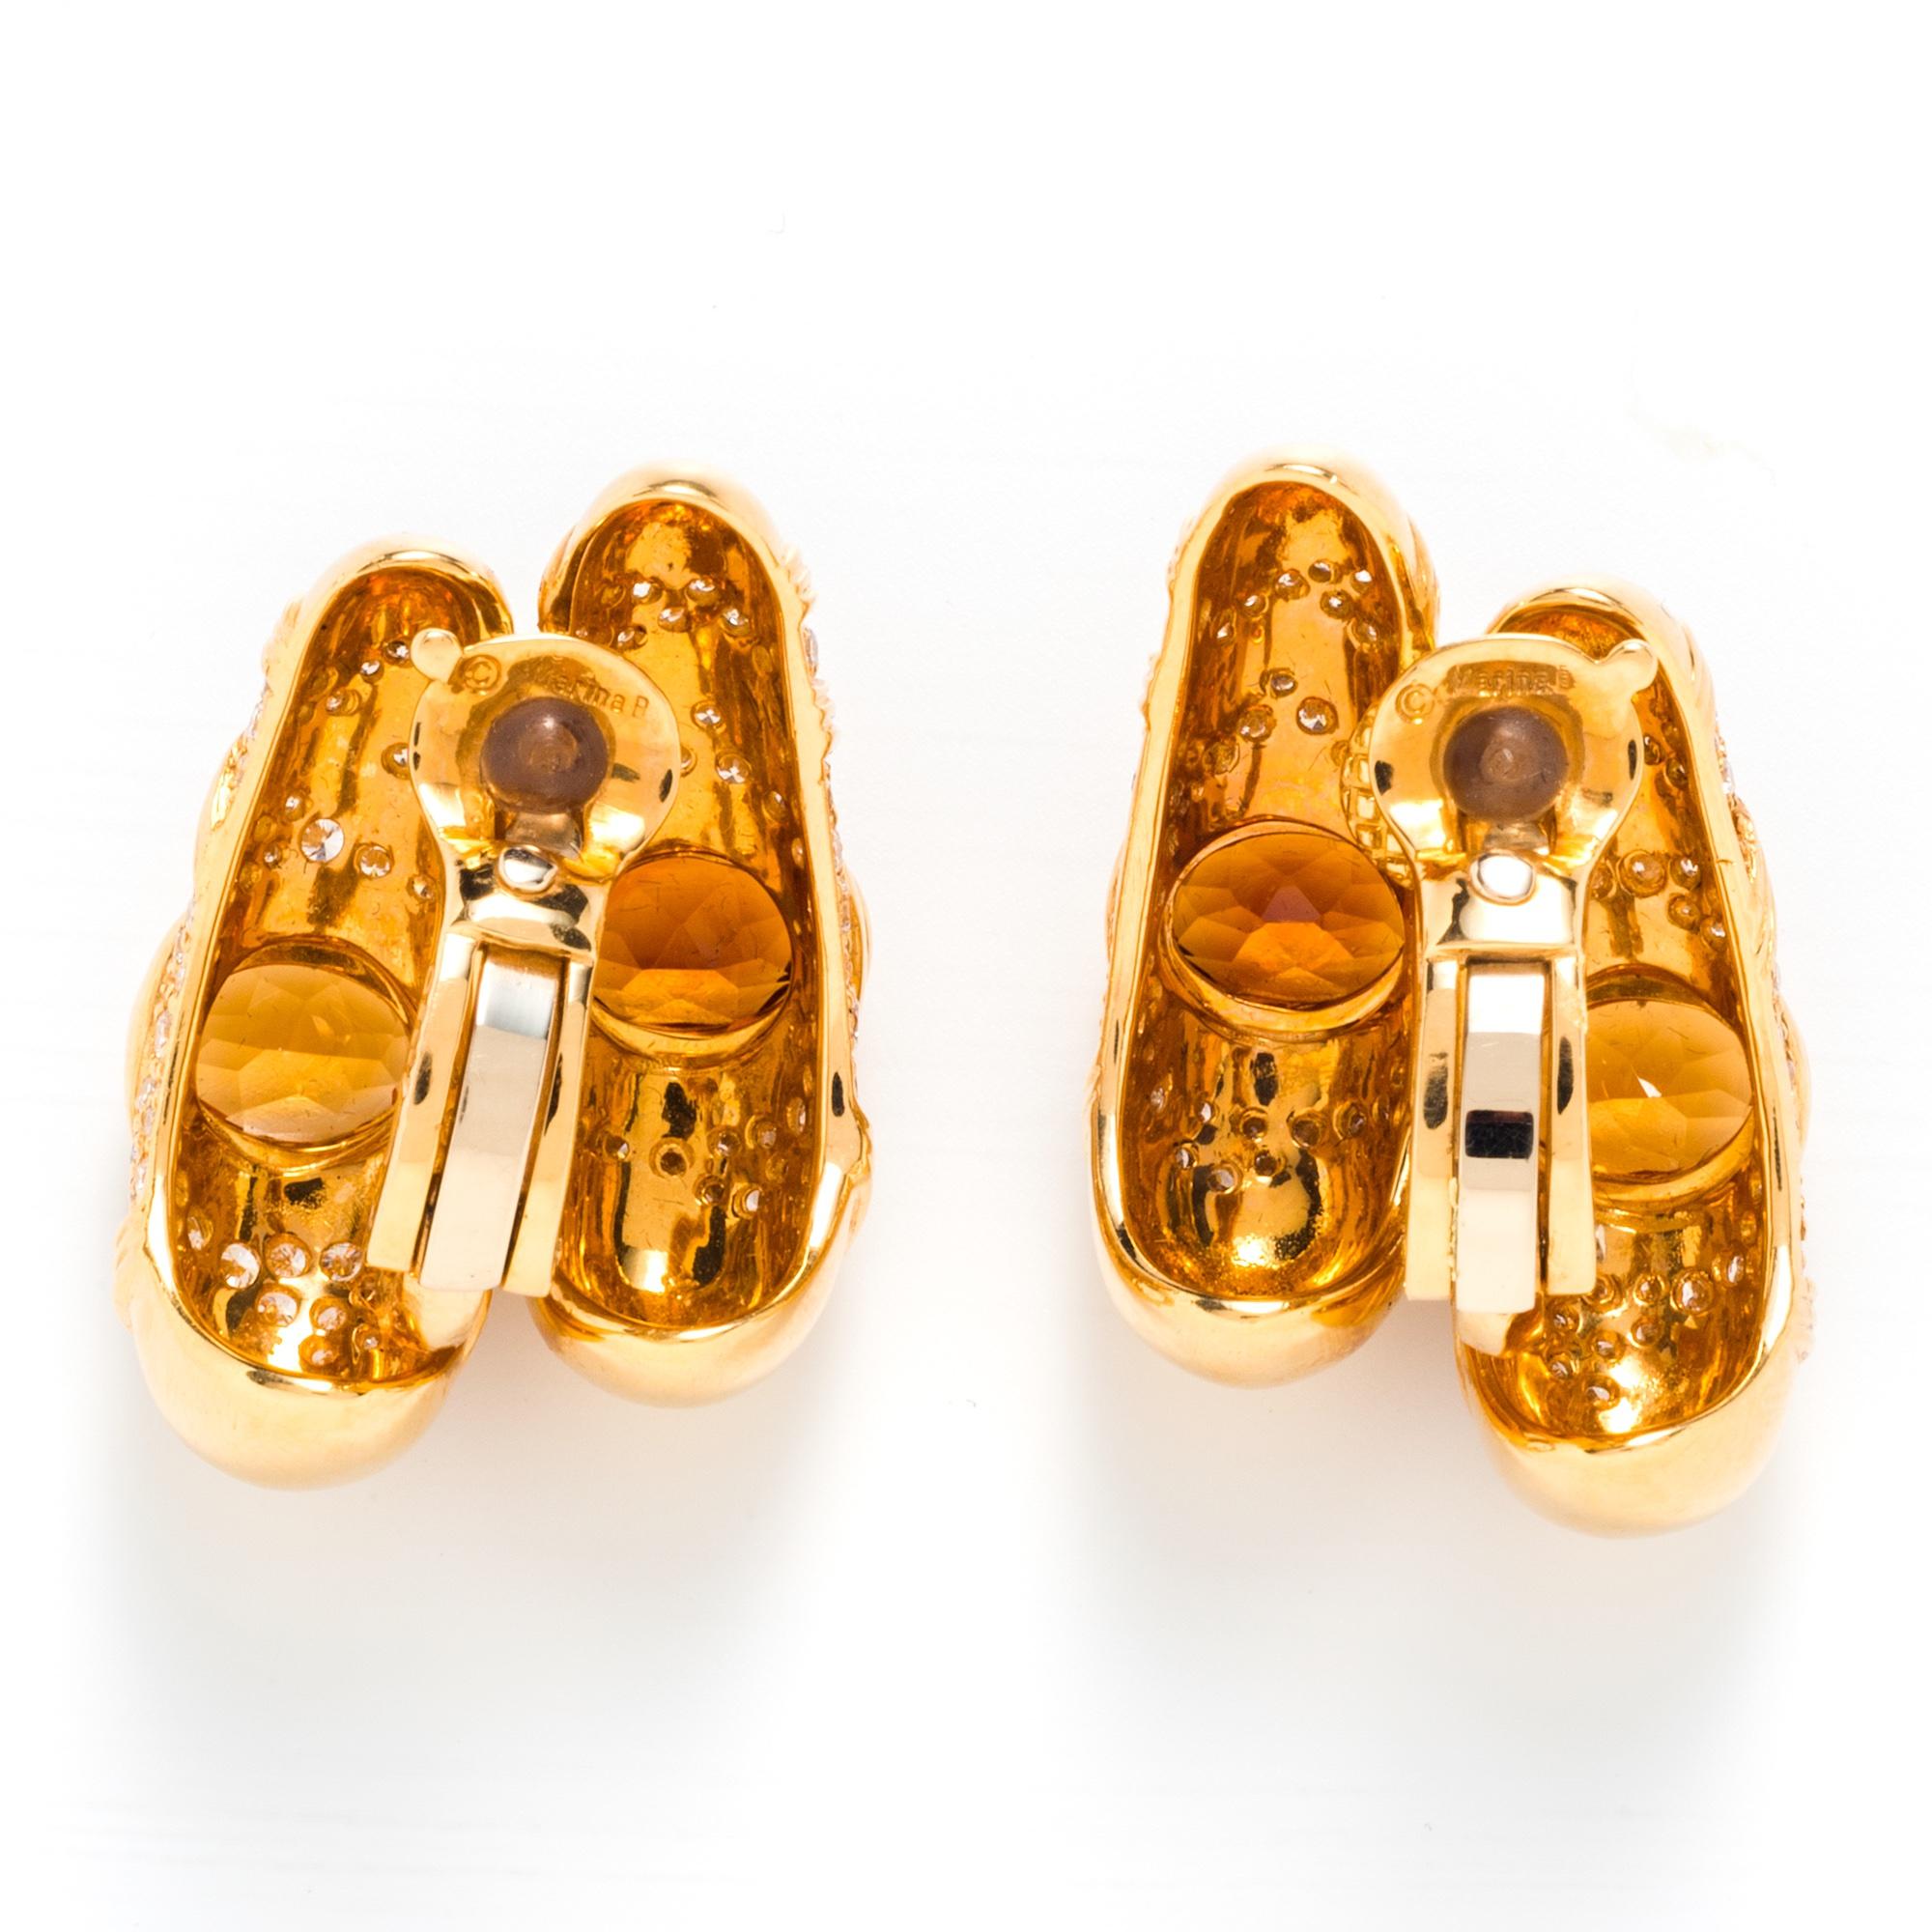 Marina B often revisited and reinterpreted her earlier designs. She first created Onda pieces in the late 1970s and continued to play with the motif throughout her career. These elegant Onda Beta earrings from 1991 are each set with two citrines in